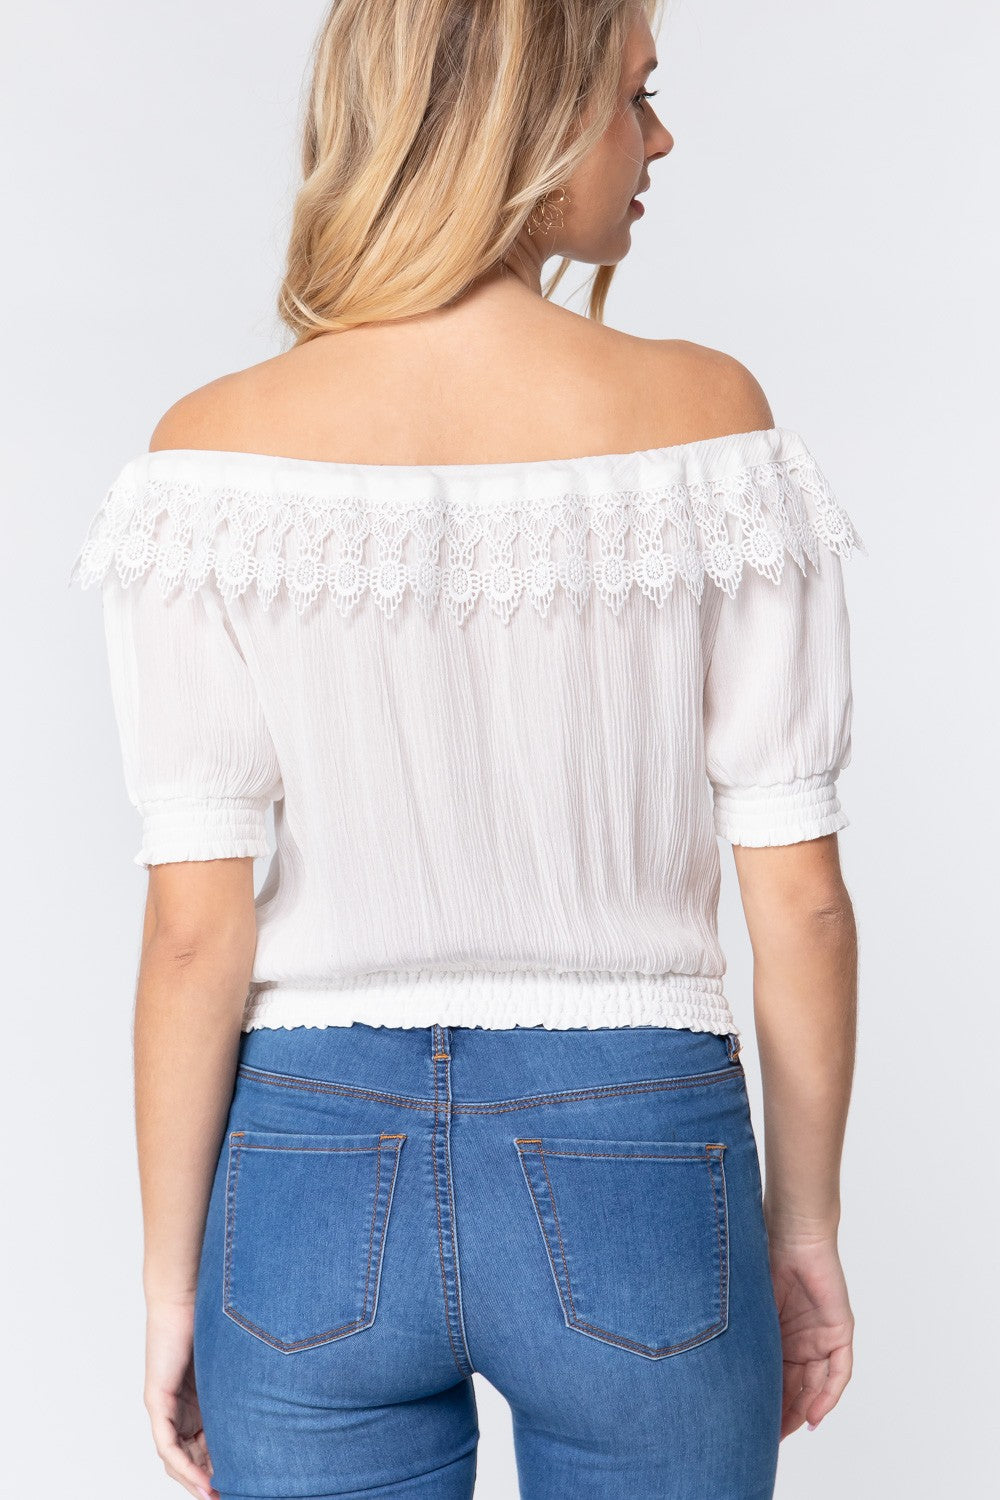 Off Shoulder Lace Detailed Top - LOLA LUXE